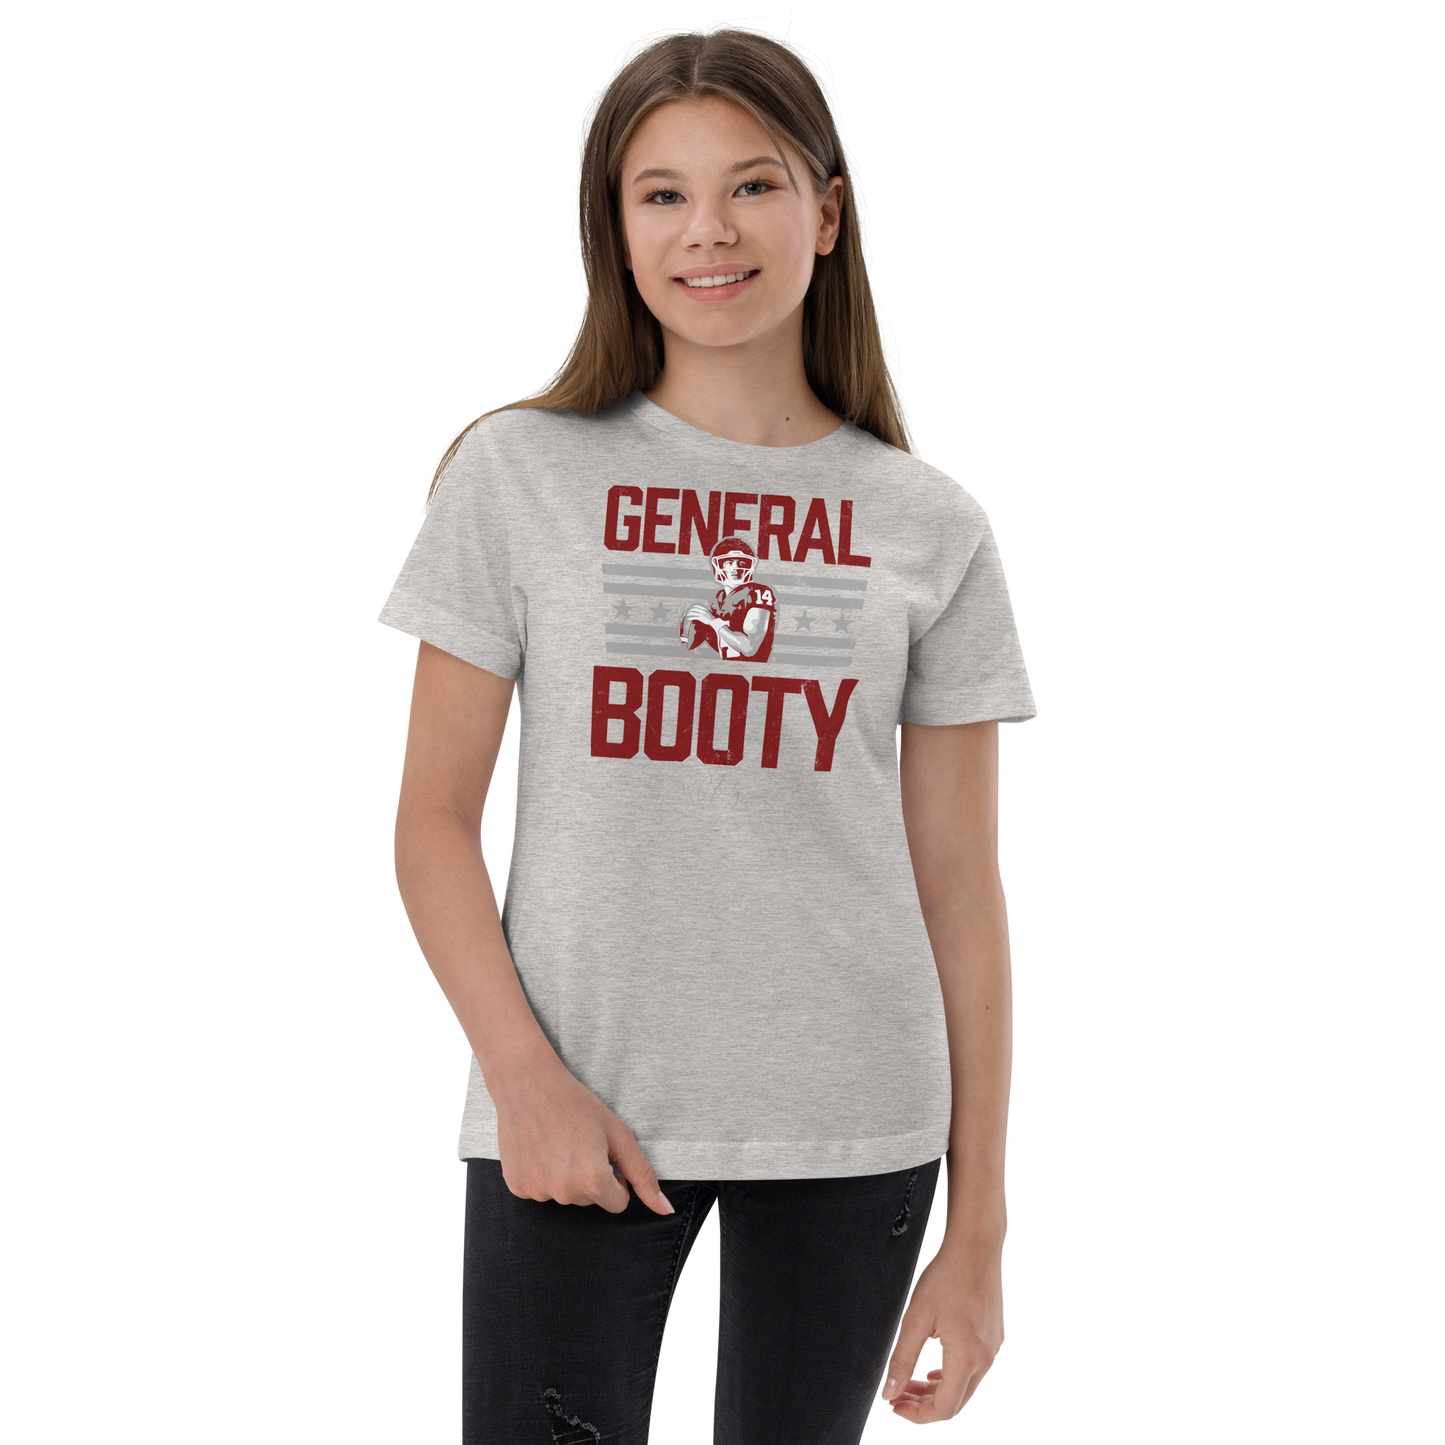 STARS N' STRIPES YOUTH - The General Booty Official Shop by More Than Just A Name | MTJN